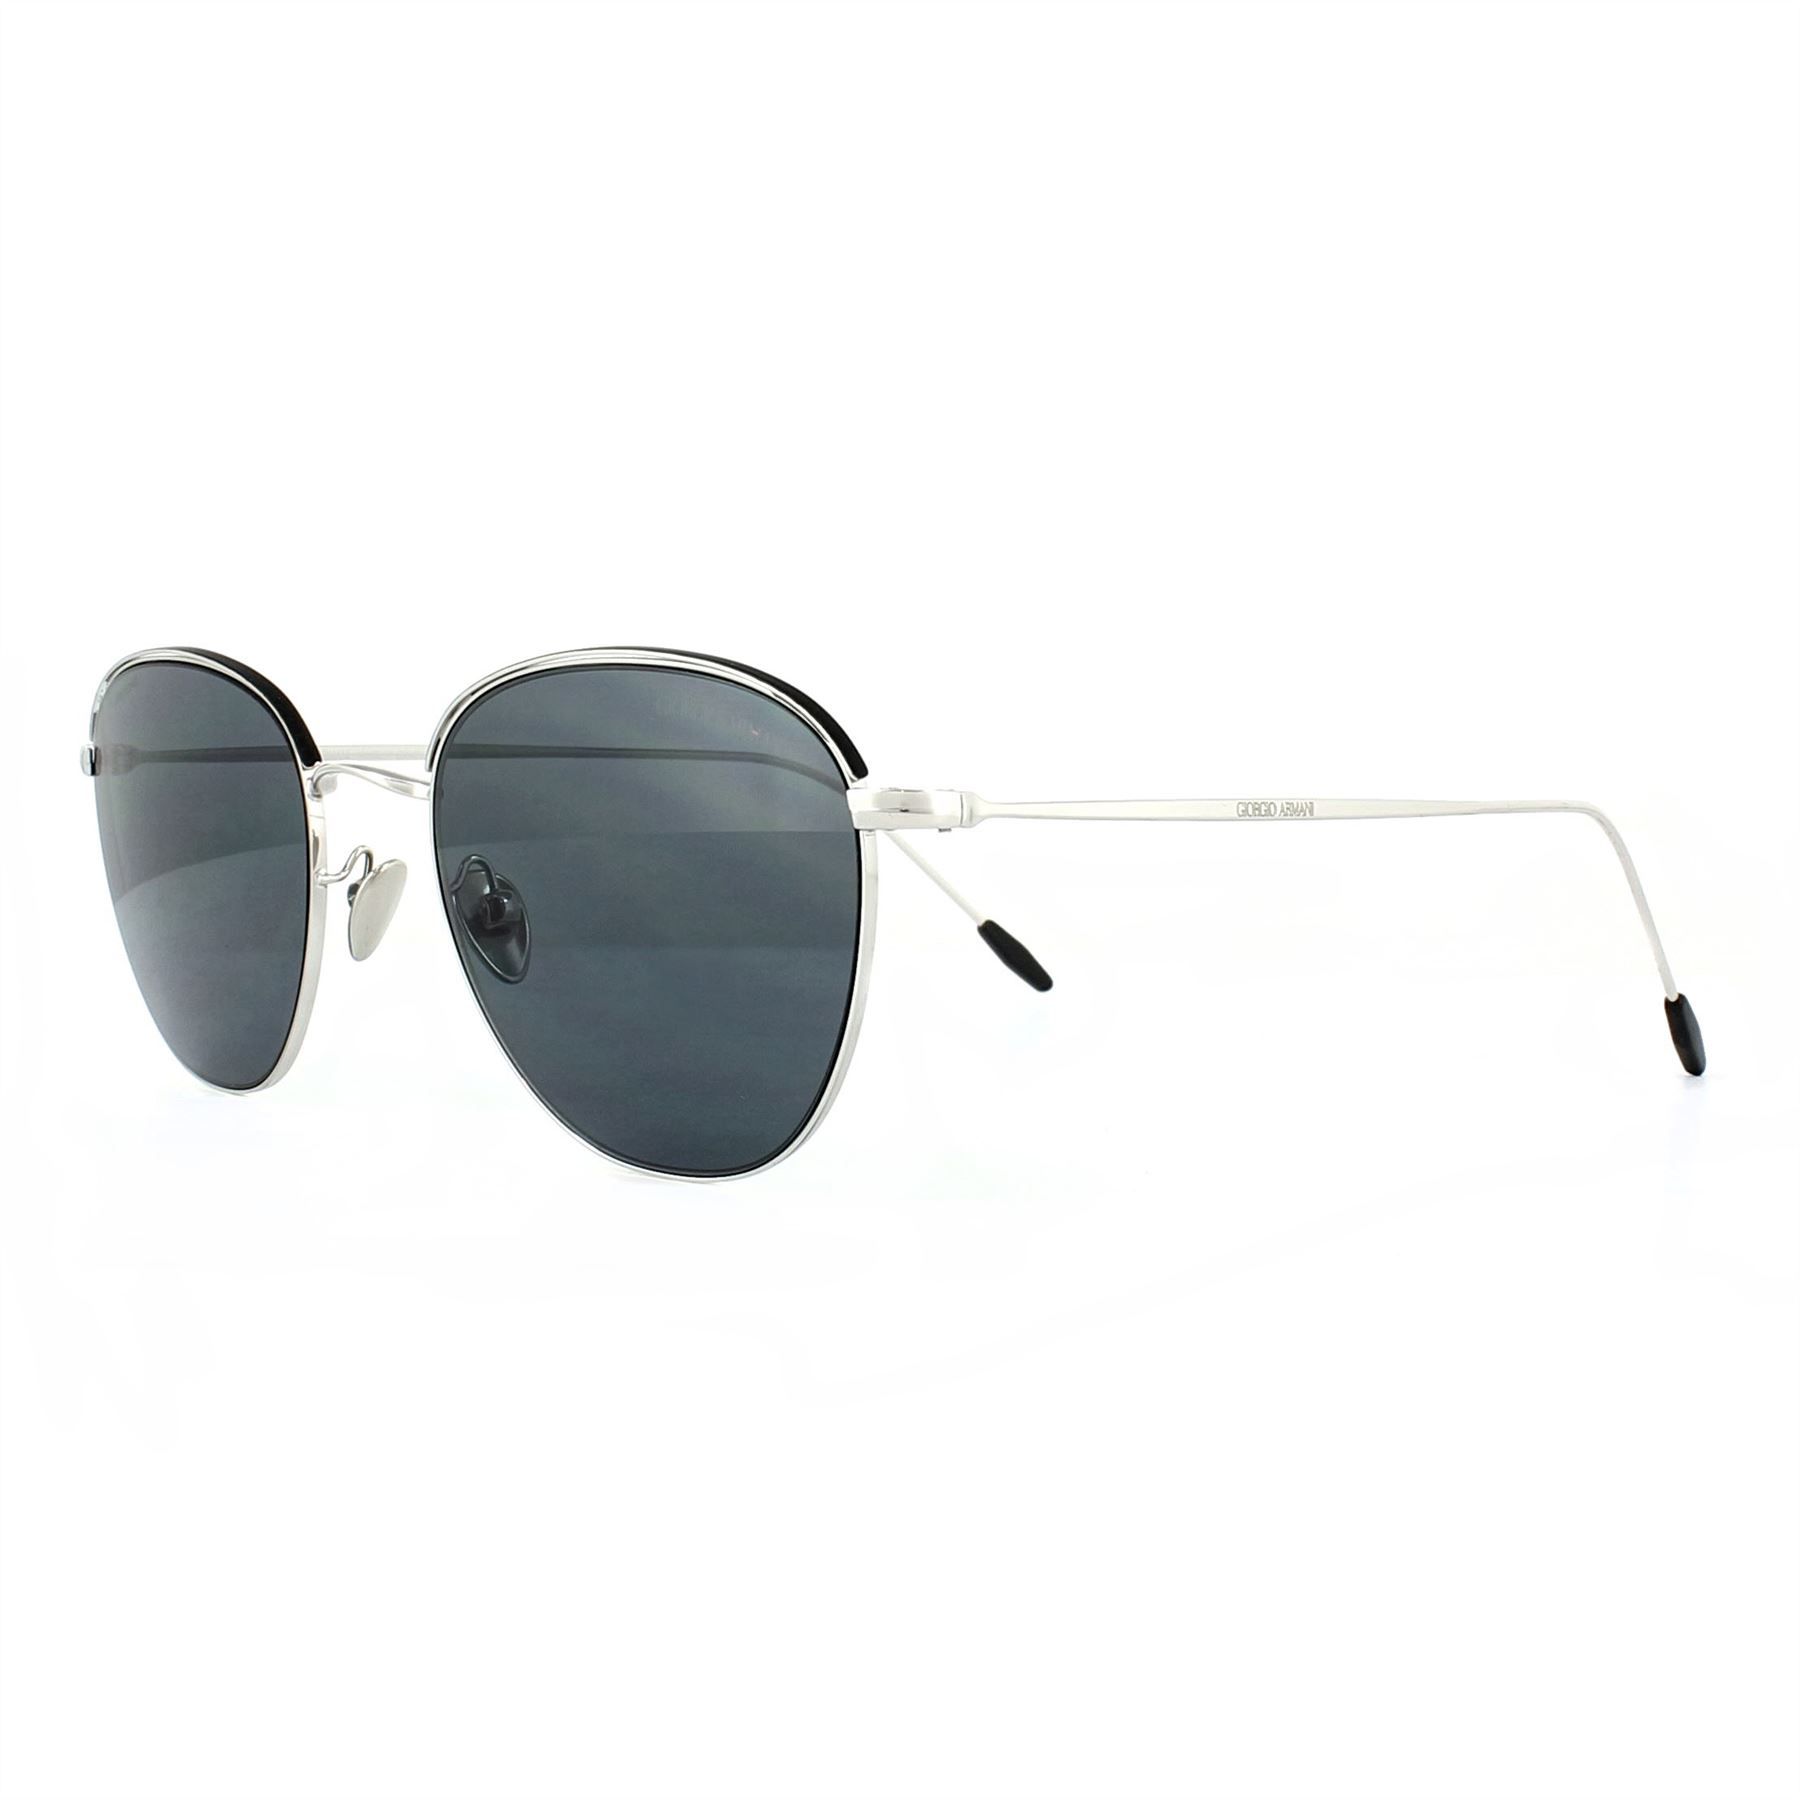 Giorgio Armani Sunglasses AR6048 301587 Silver and Matte Black Grey have a metal frame which is a Round shape and is for men